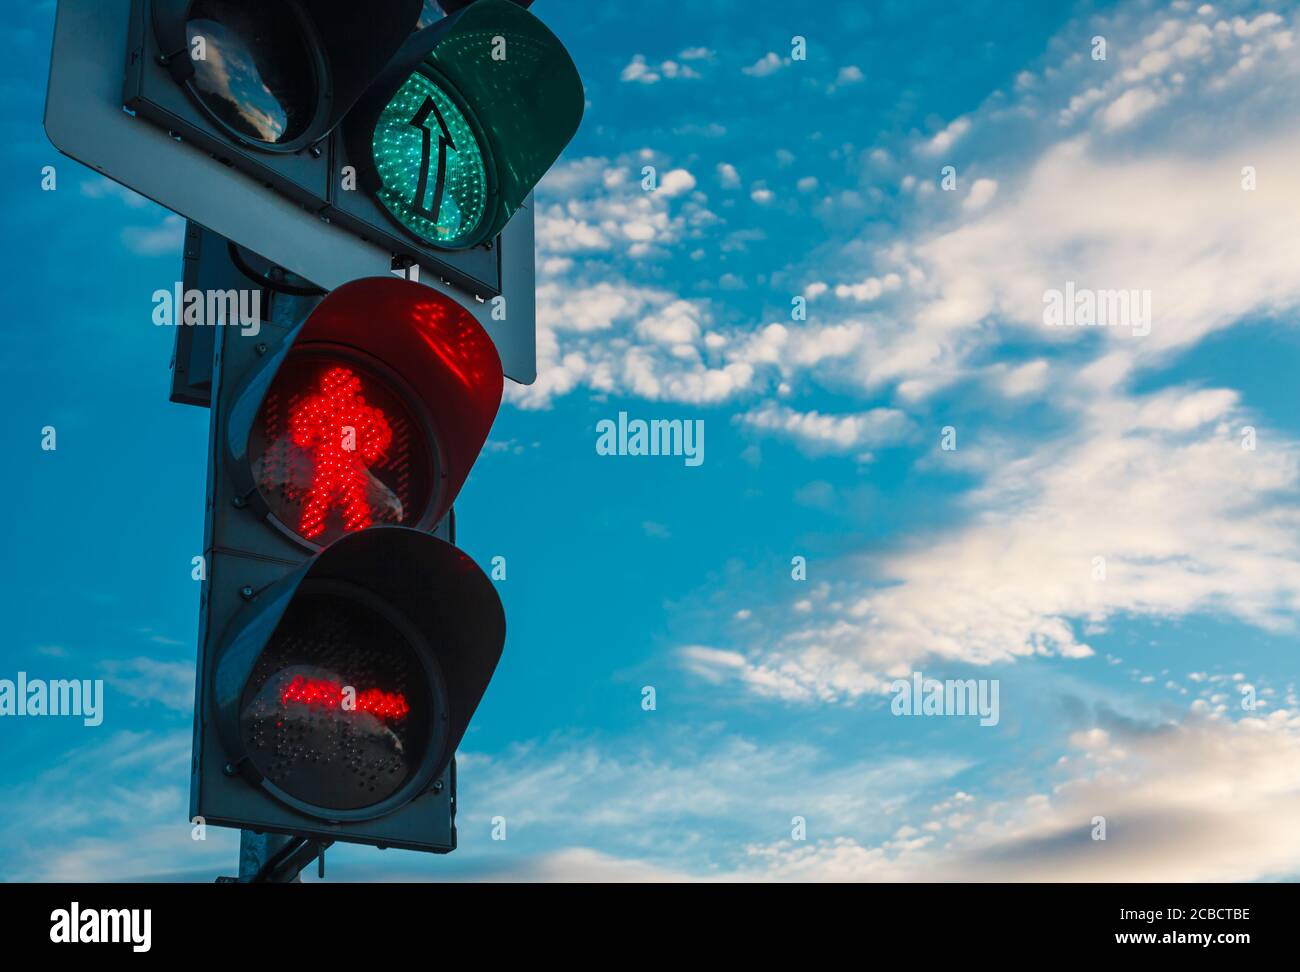 Traffic light with green light for cars and red light for people. Stoplight against blue sky with white clouds Stock Photo